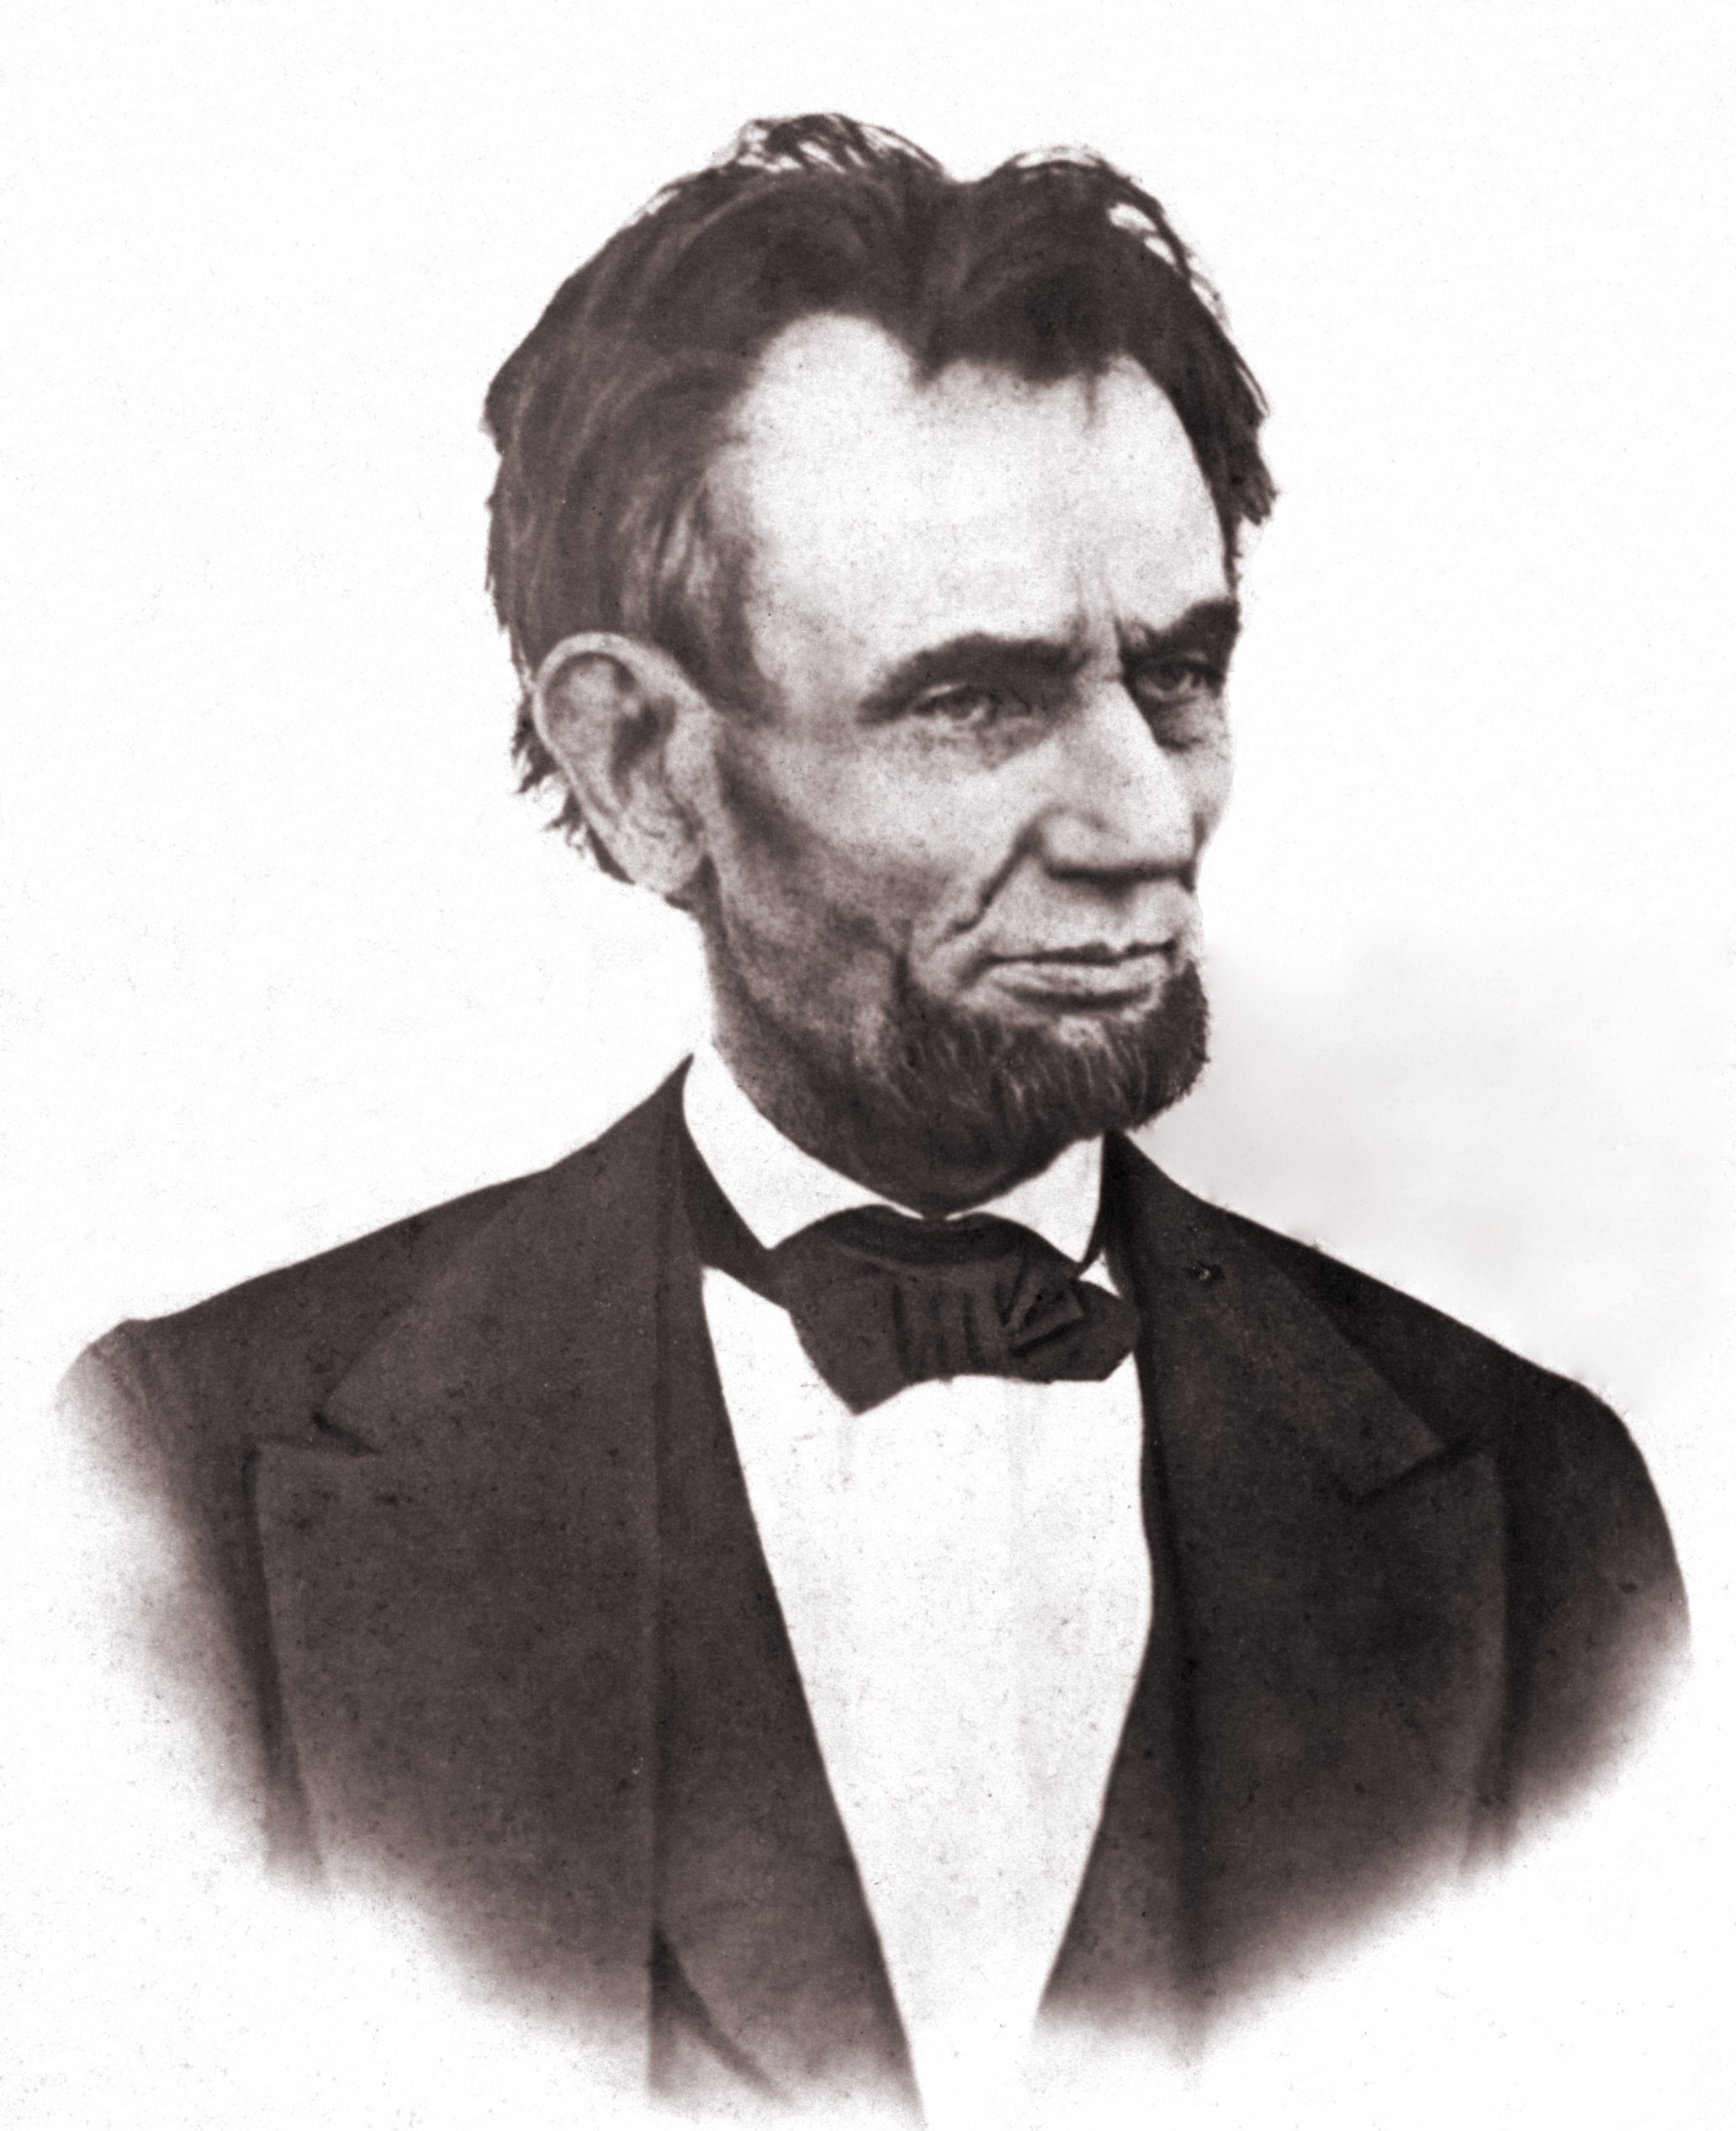 Stunning Image of Abraham Lincoln on 3/6/1865 